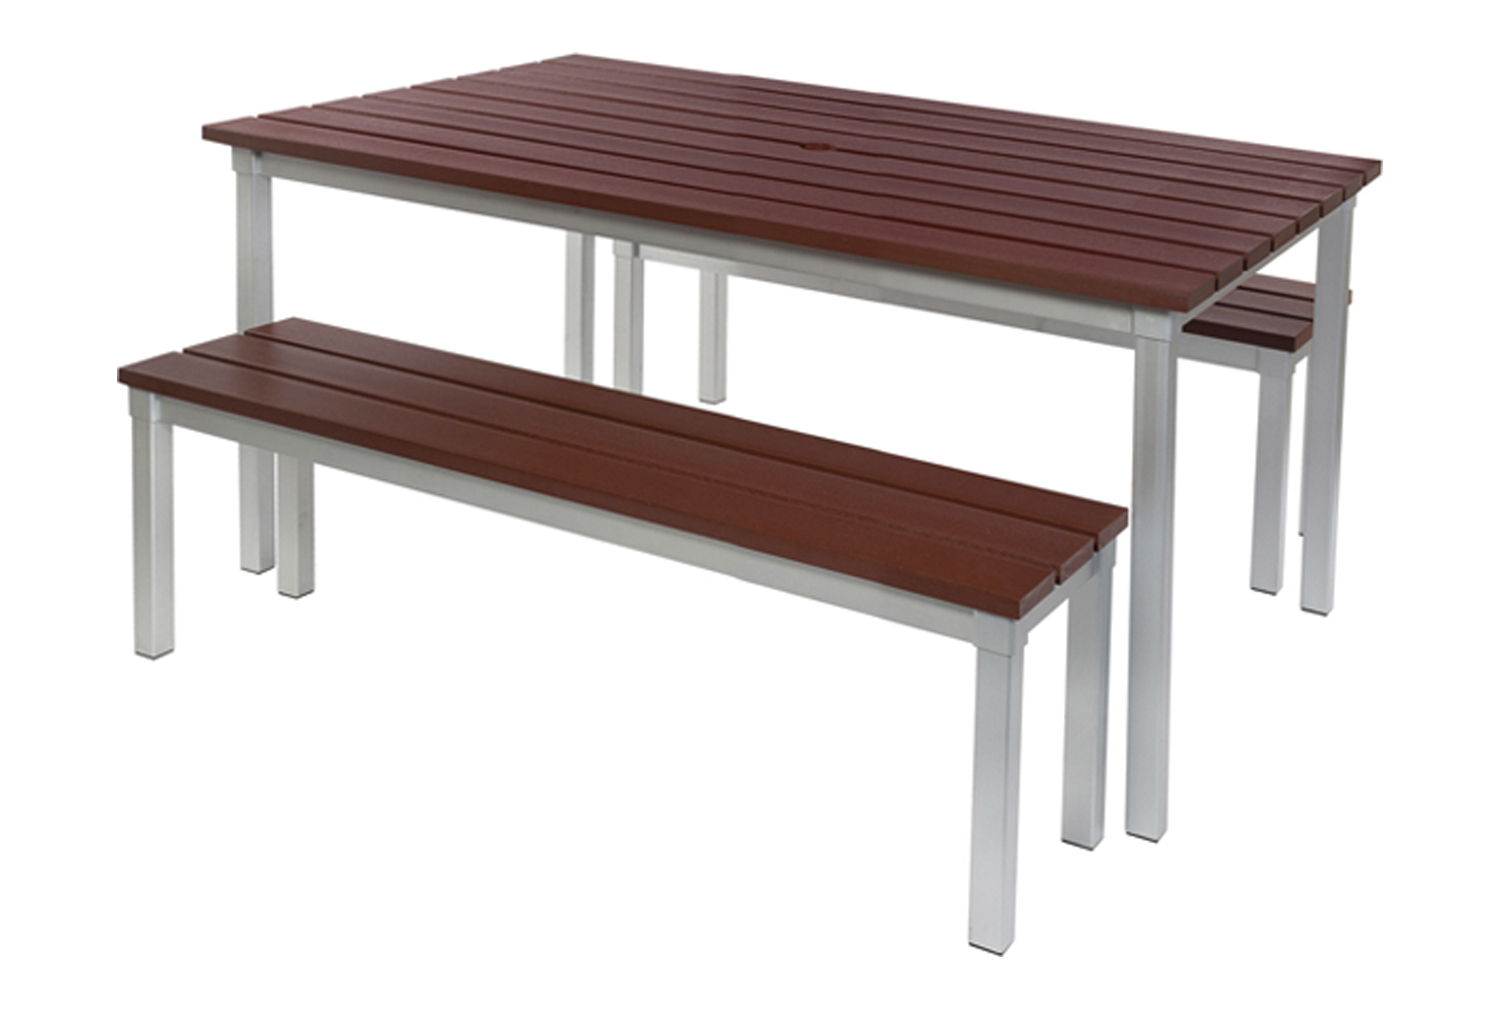 Enviro Outdoor Furniture Bundle Deal With 2 Benches, 125wx90dx71h (cm)